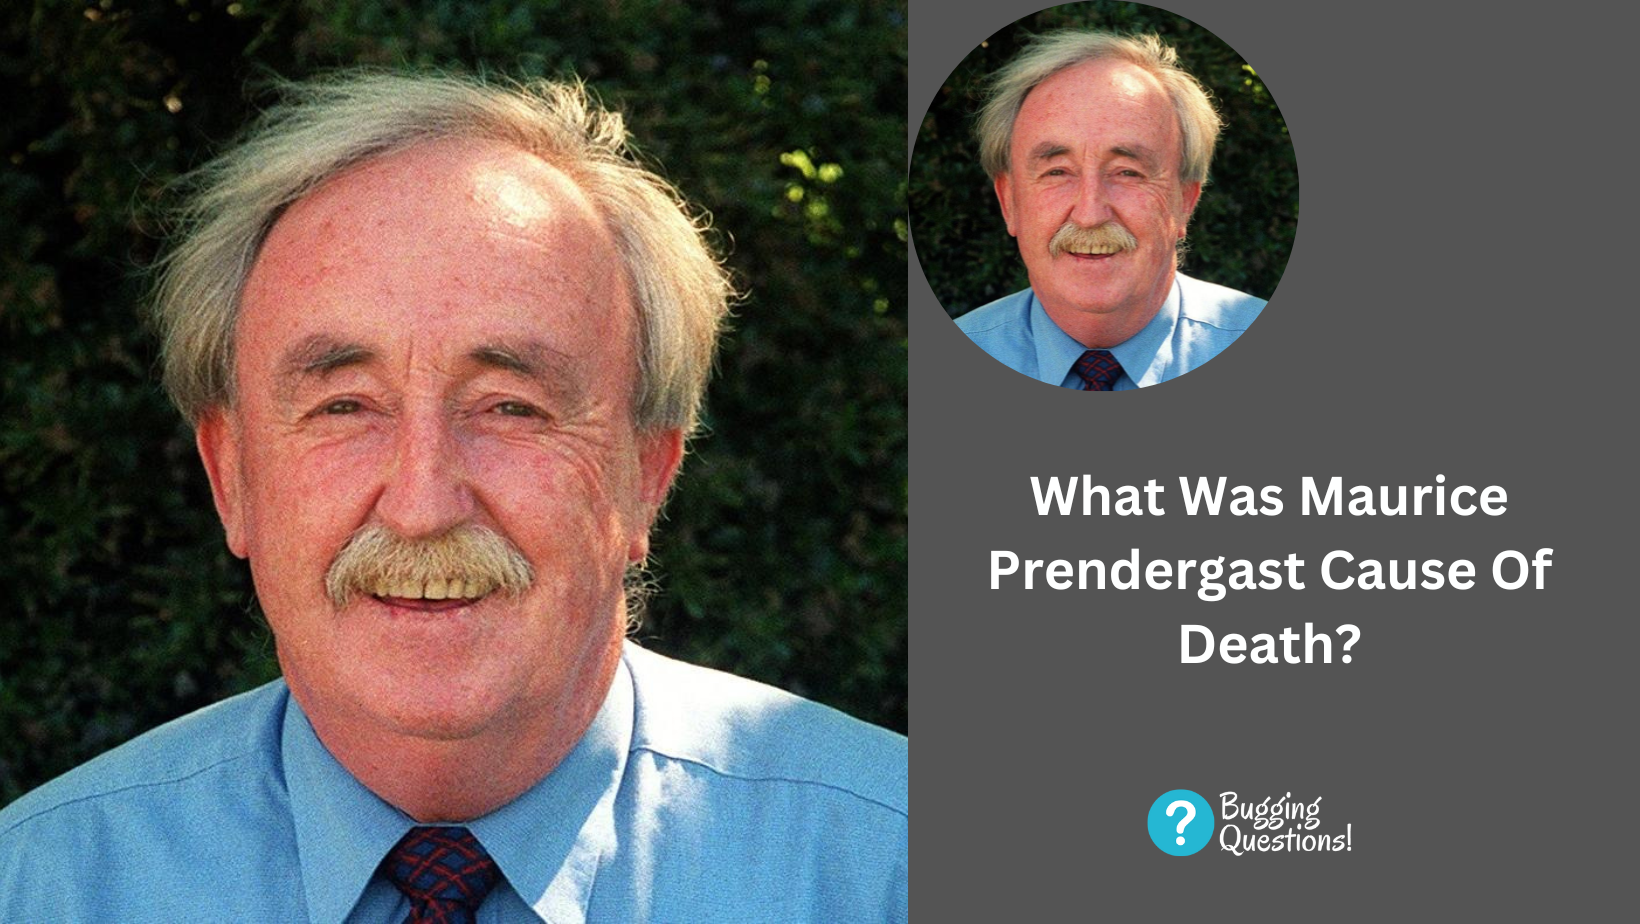 What Was Maurice Prendergast Cause Of Death?